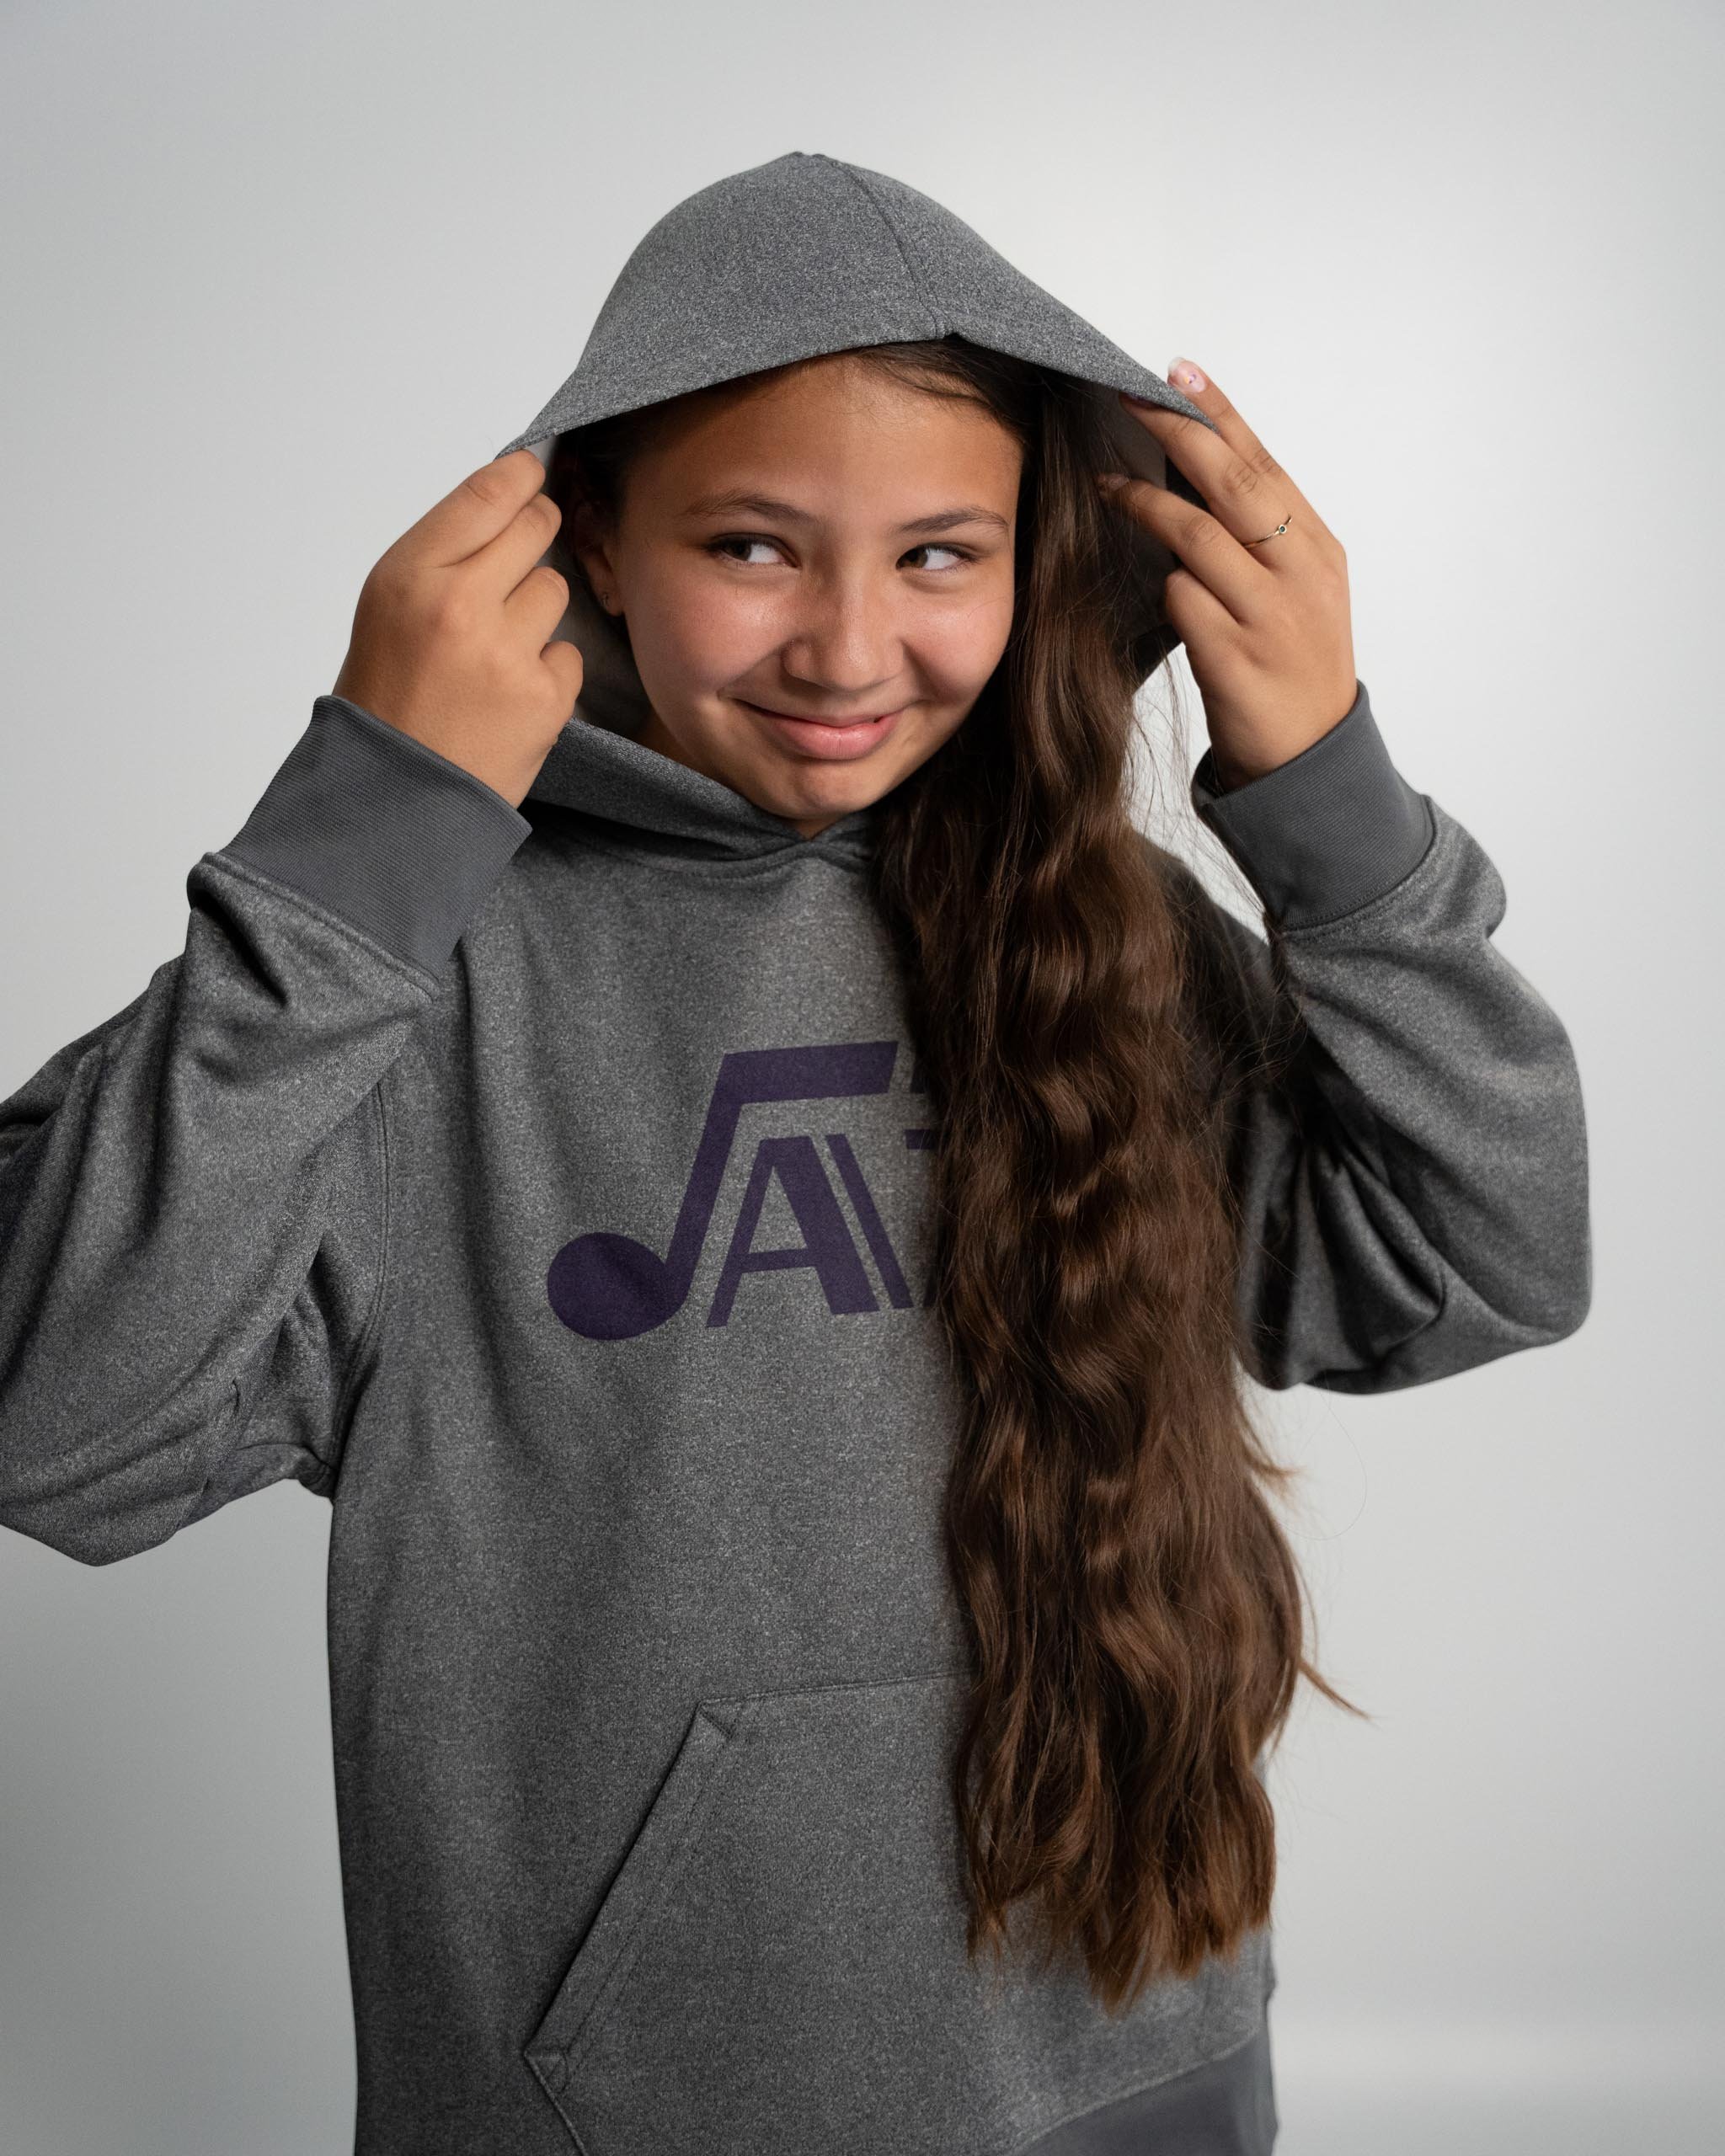 Exclusive Junior Jazz Gear Now Available! – Utah Jazz Youth